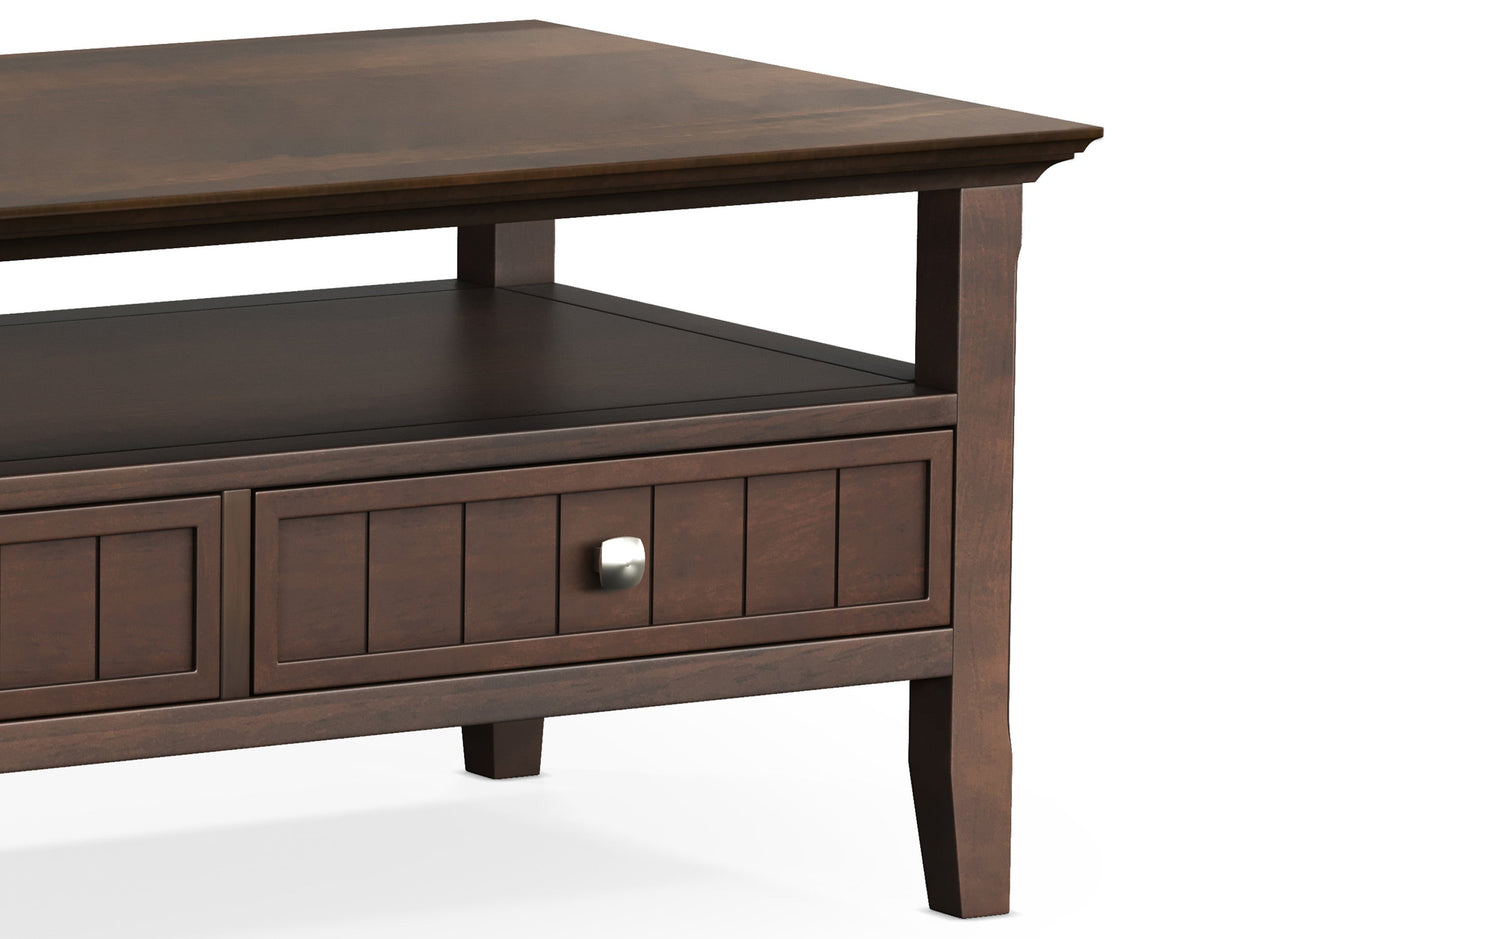 Acadian Coffee Table with Drawer